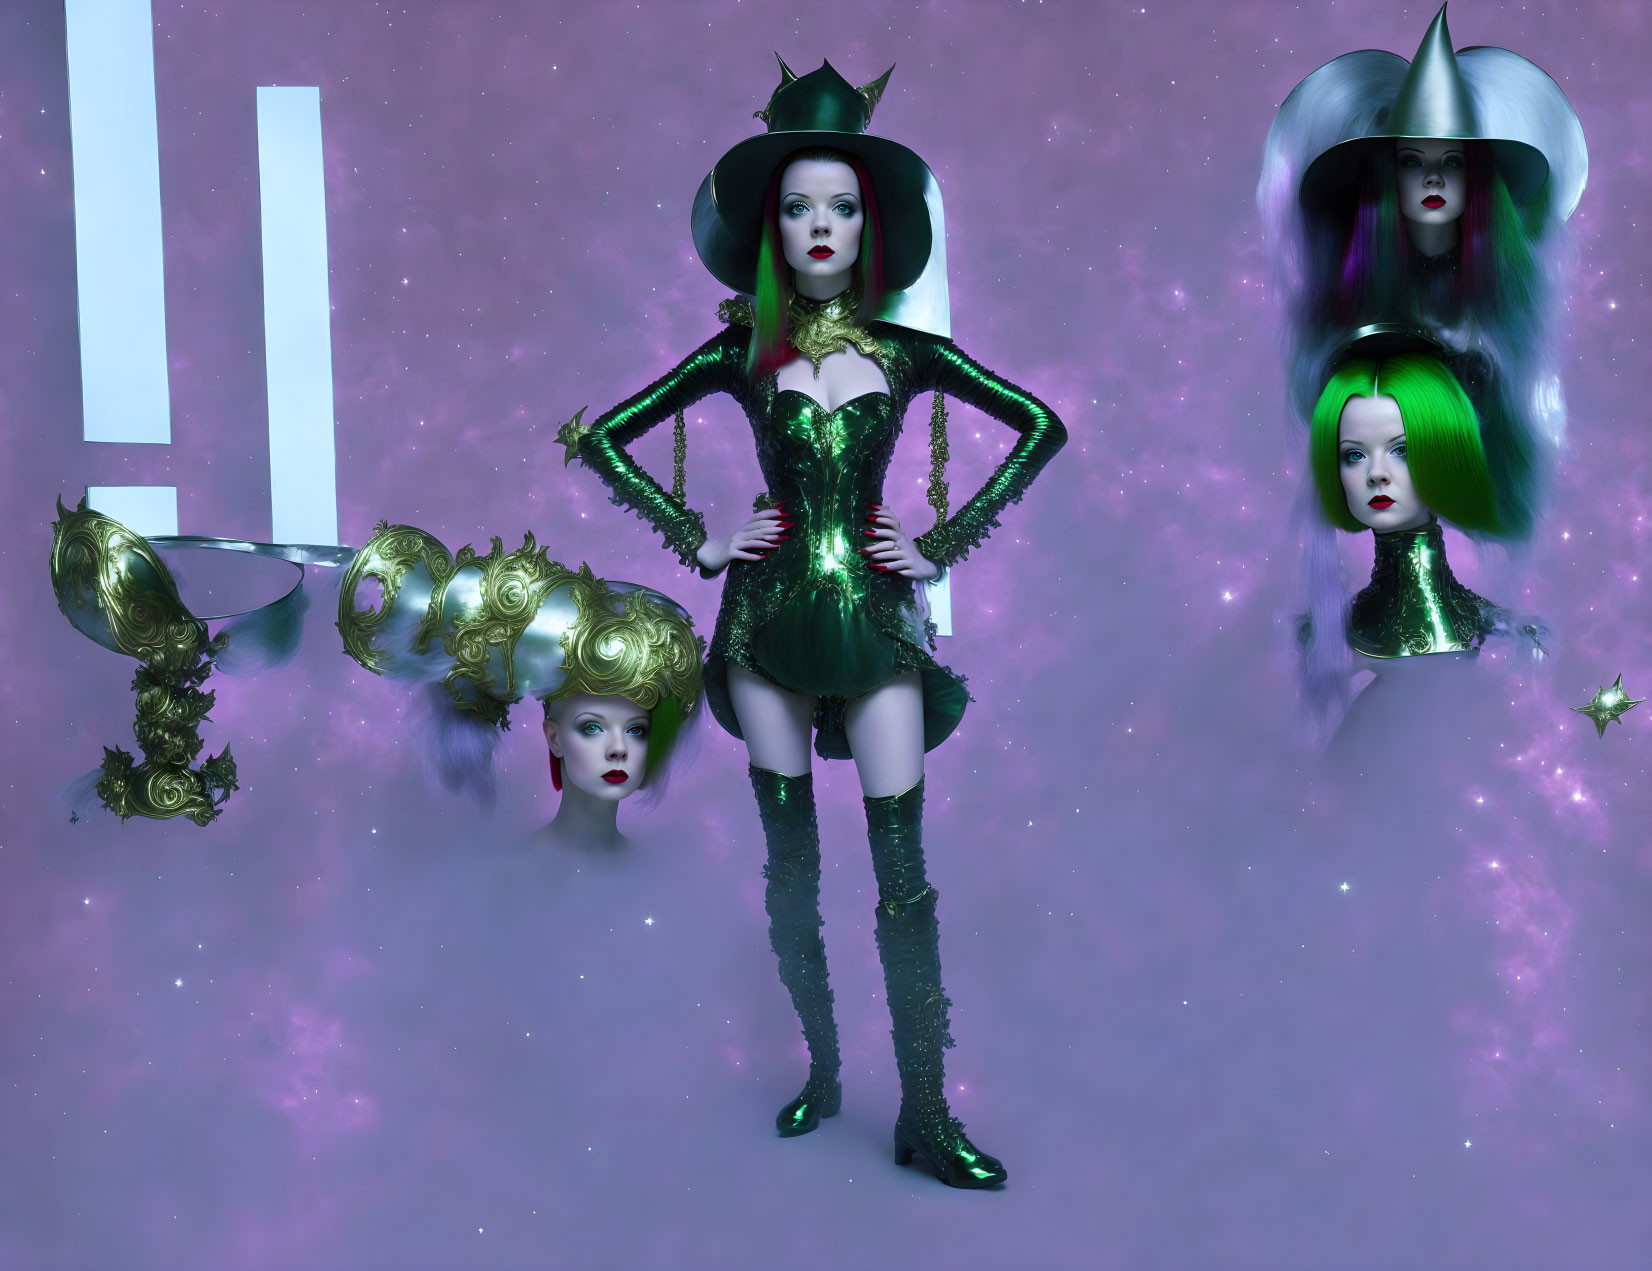 Surreal artwork: Woman in green bodysuit with floating heads on starry purple background